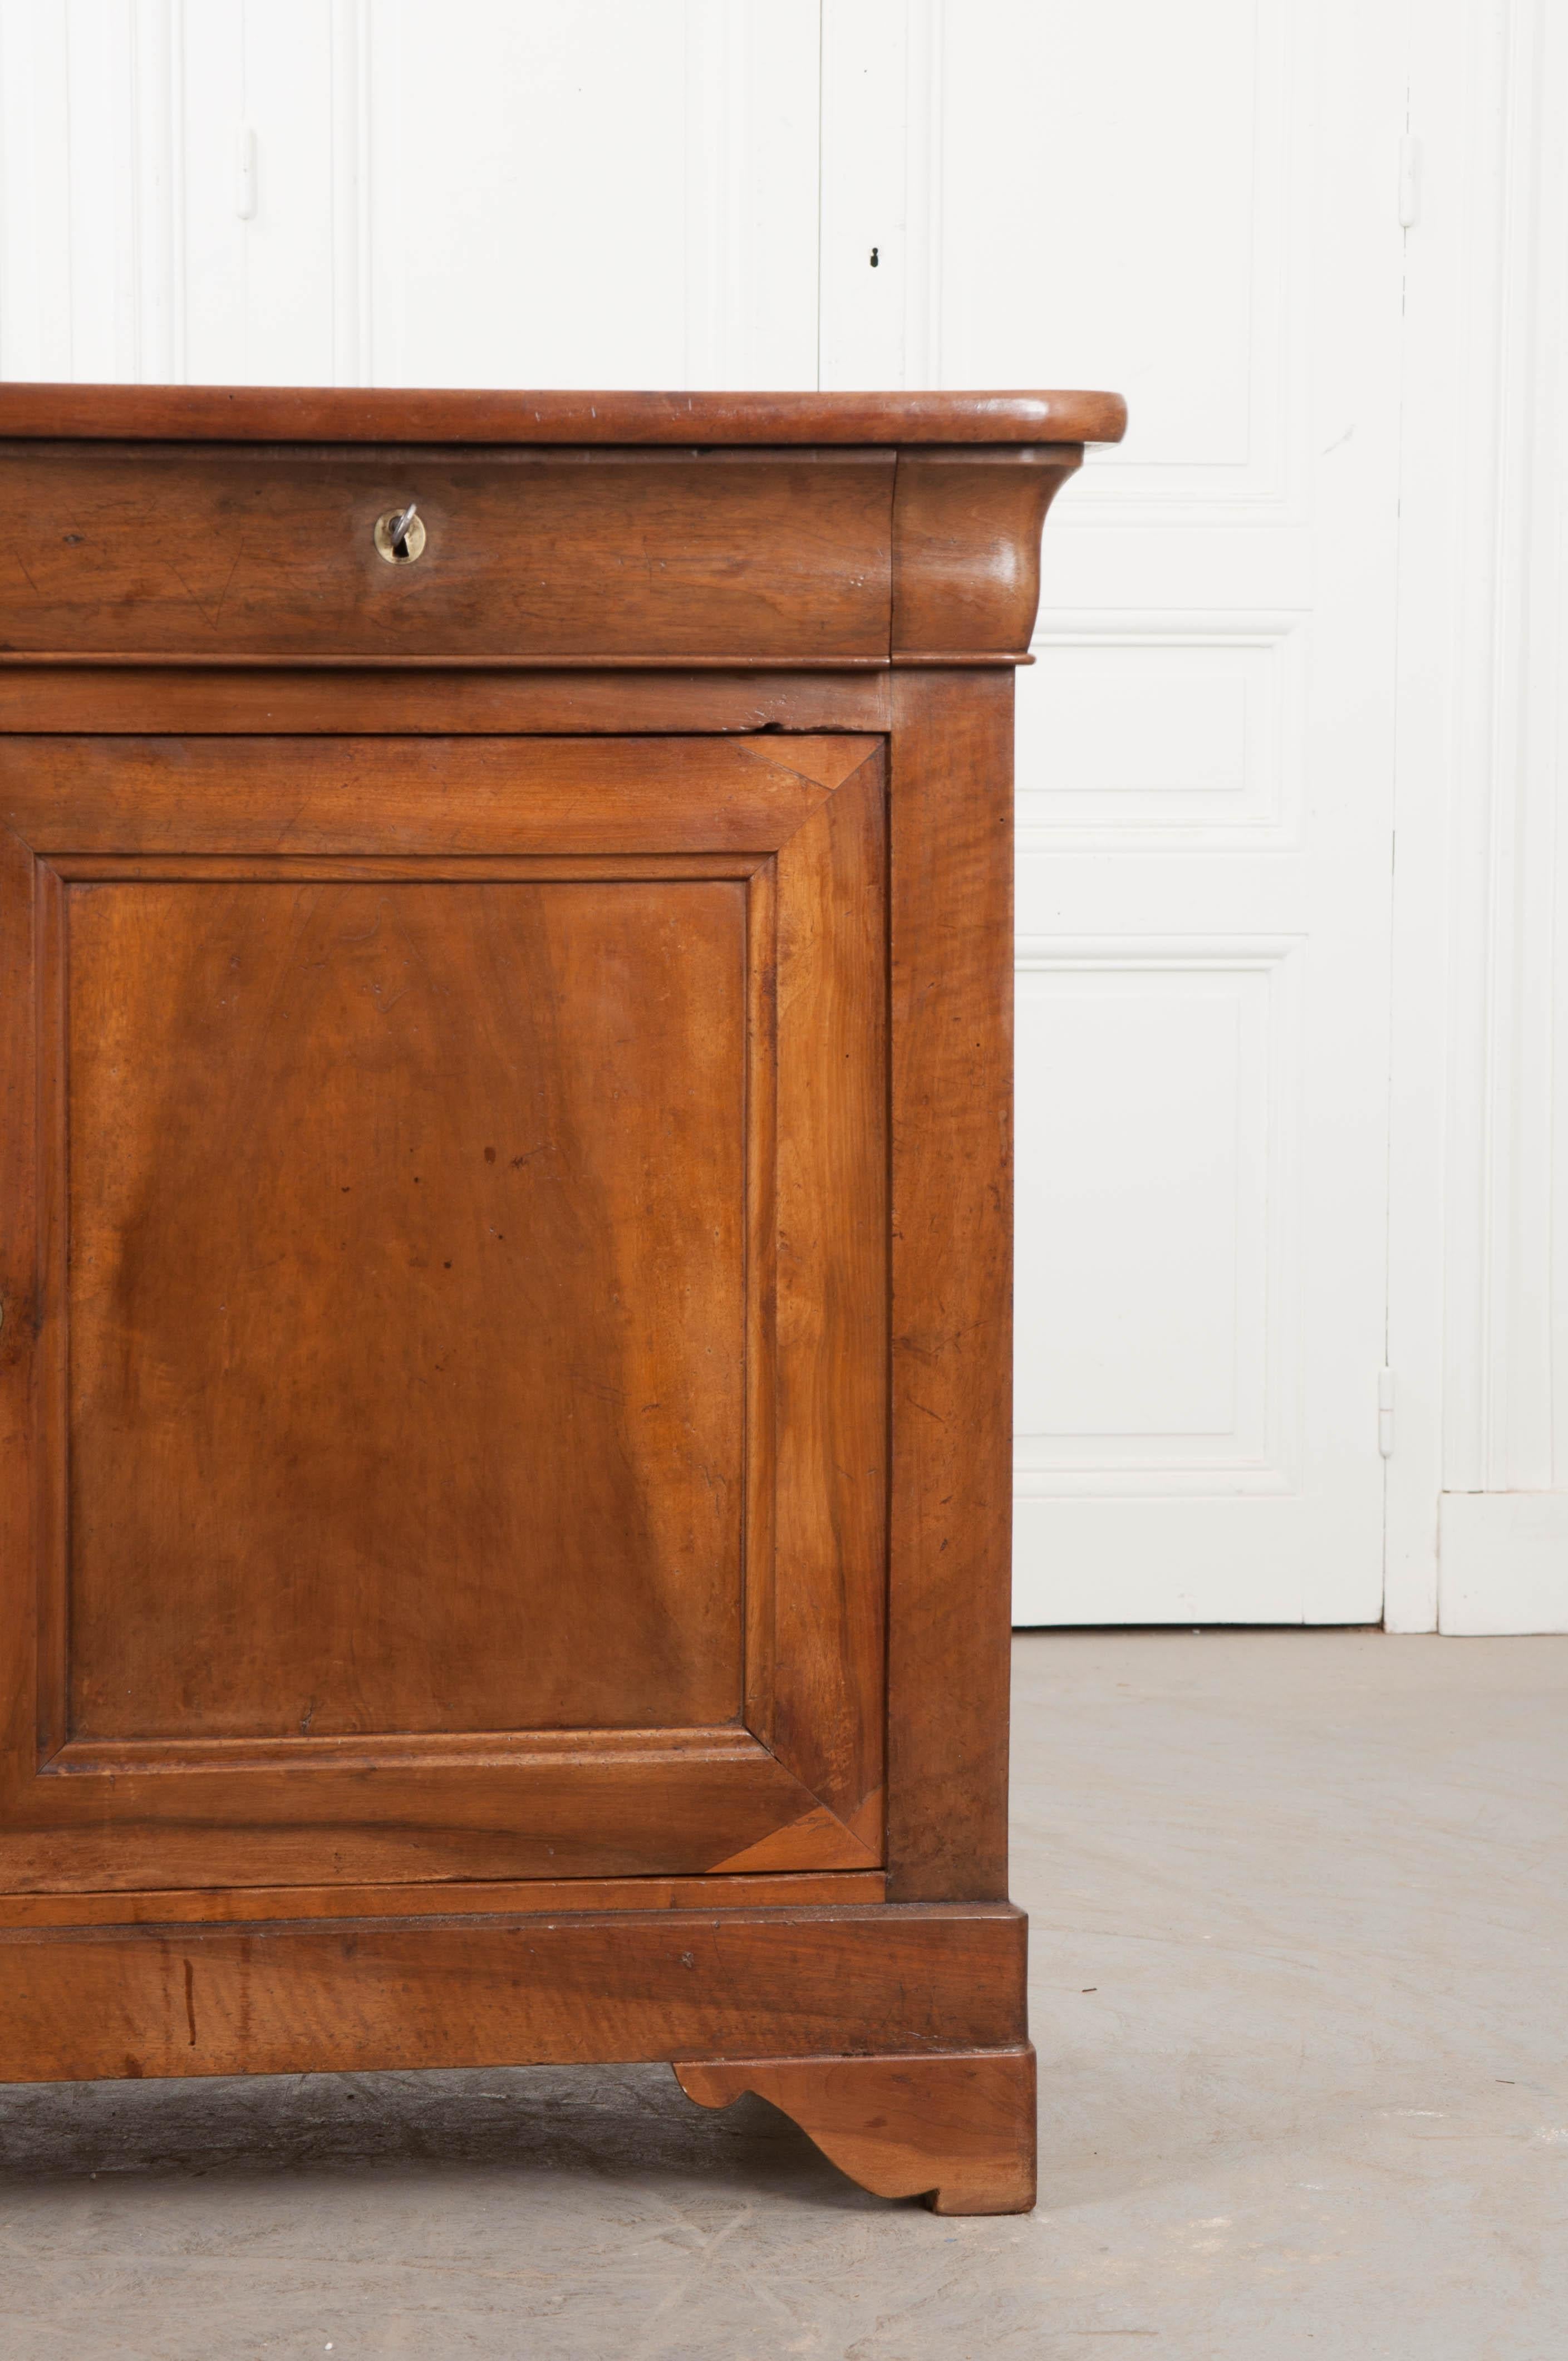 This beautiful period Louis Philippe walnut buffet, circa 1850, was found in France and boasts a gorgeous patina from years of proper French polishing. The walnut surface with rounded corners sits above a pair of apron drawers and a case with